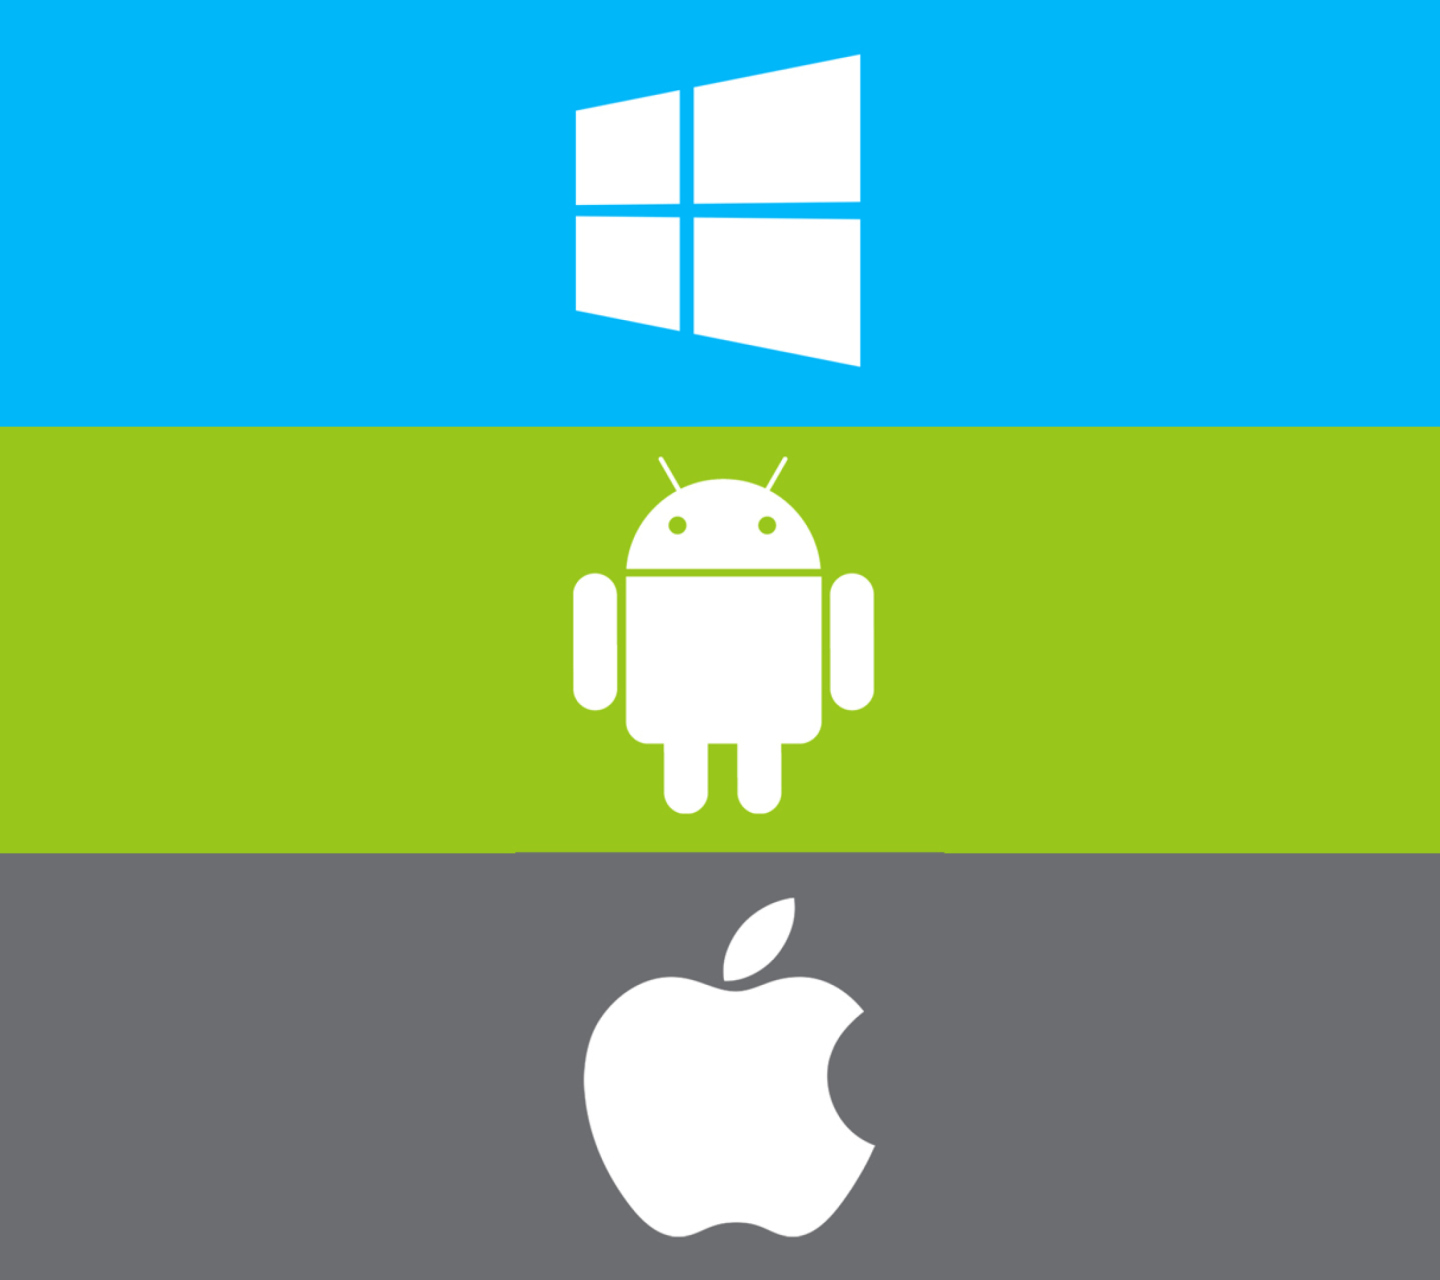 Windows, Apple, Android - What's Your Choice? wallpaper 1440x1280